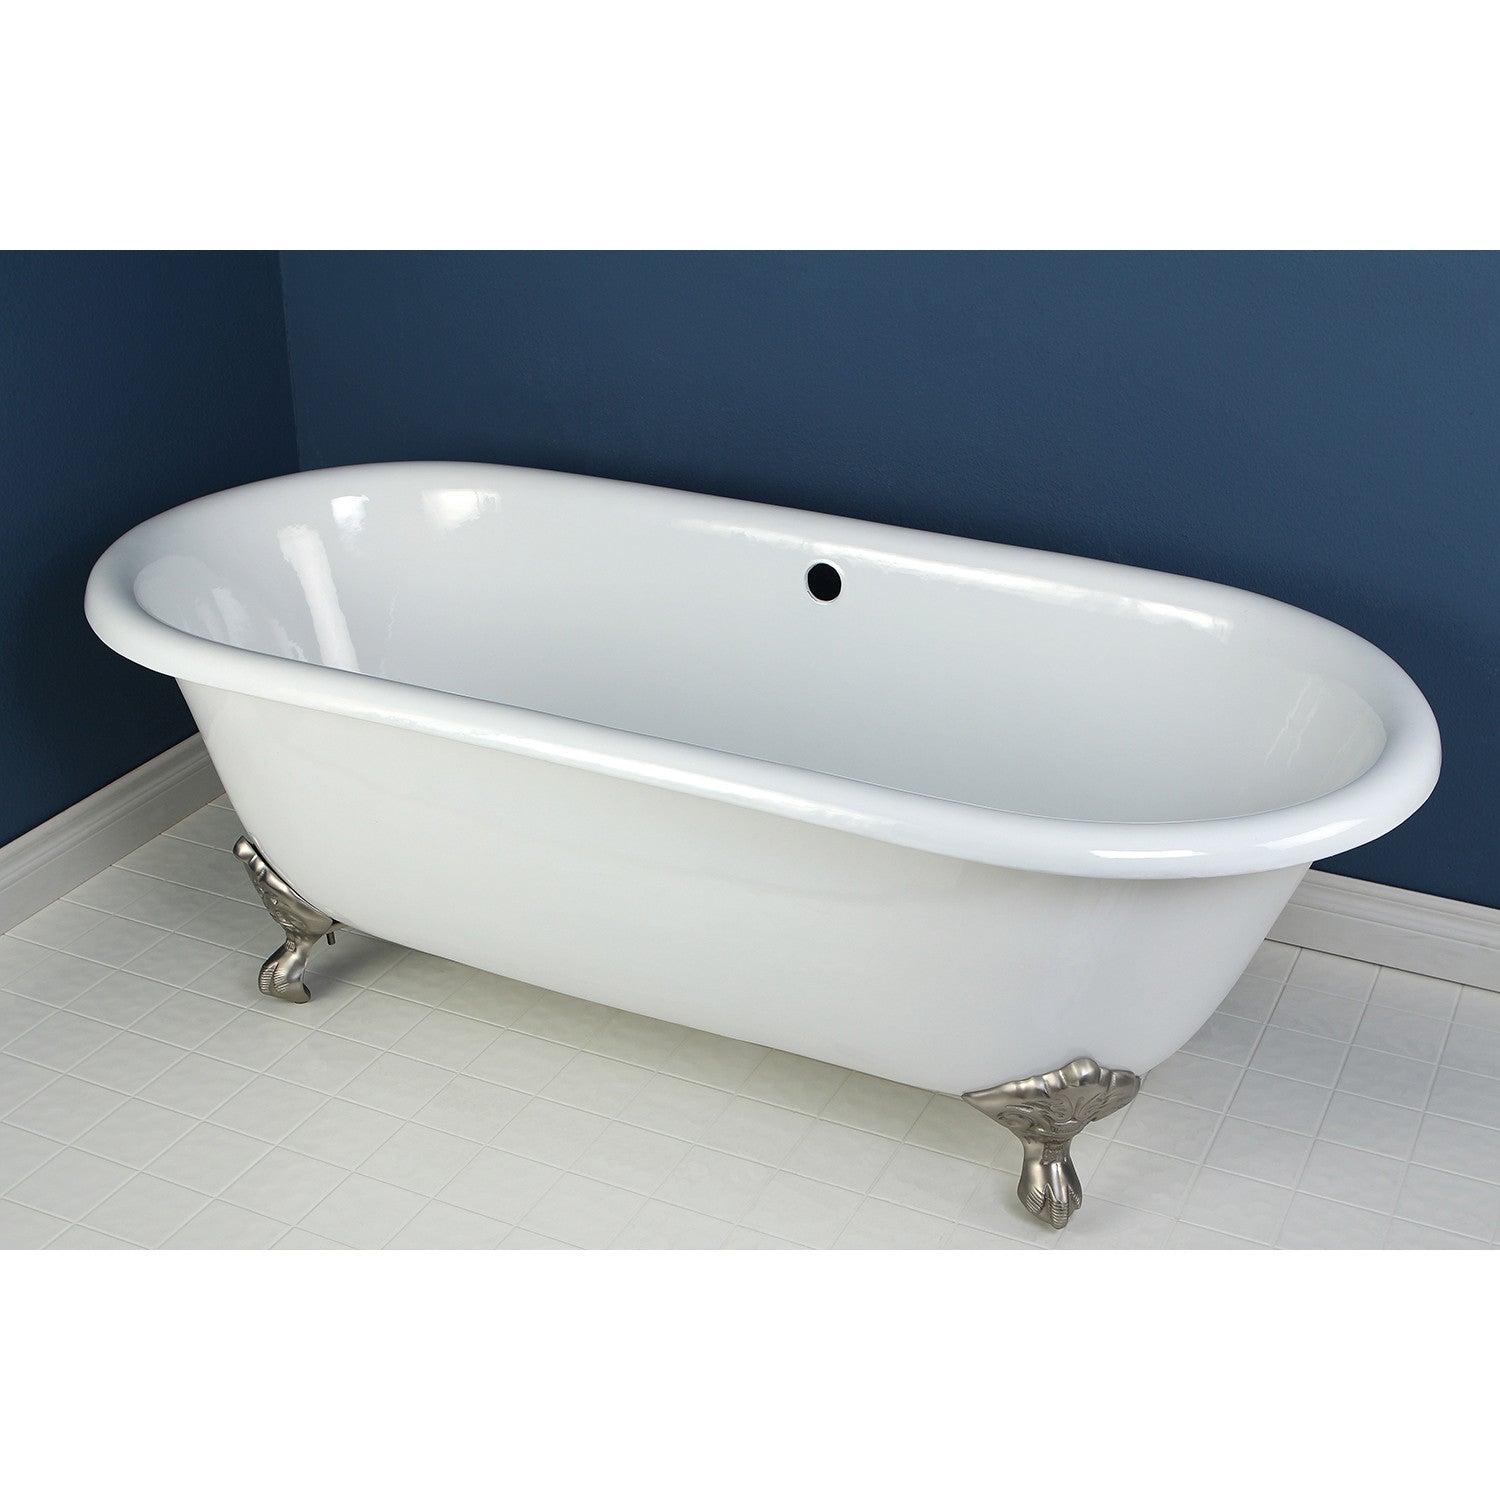 Kingston Brass Aqua Eden VCTND663013NB8 66-Inch Cast Iron Double Ended  Clawfoot Tub (